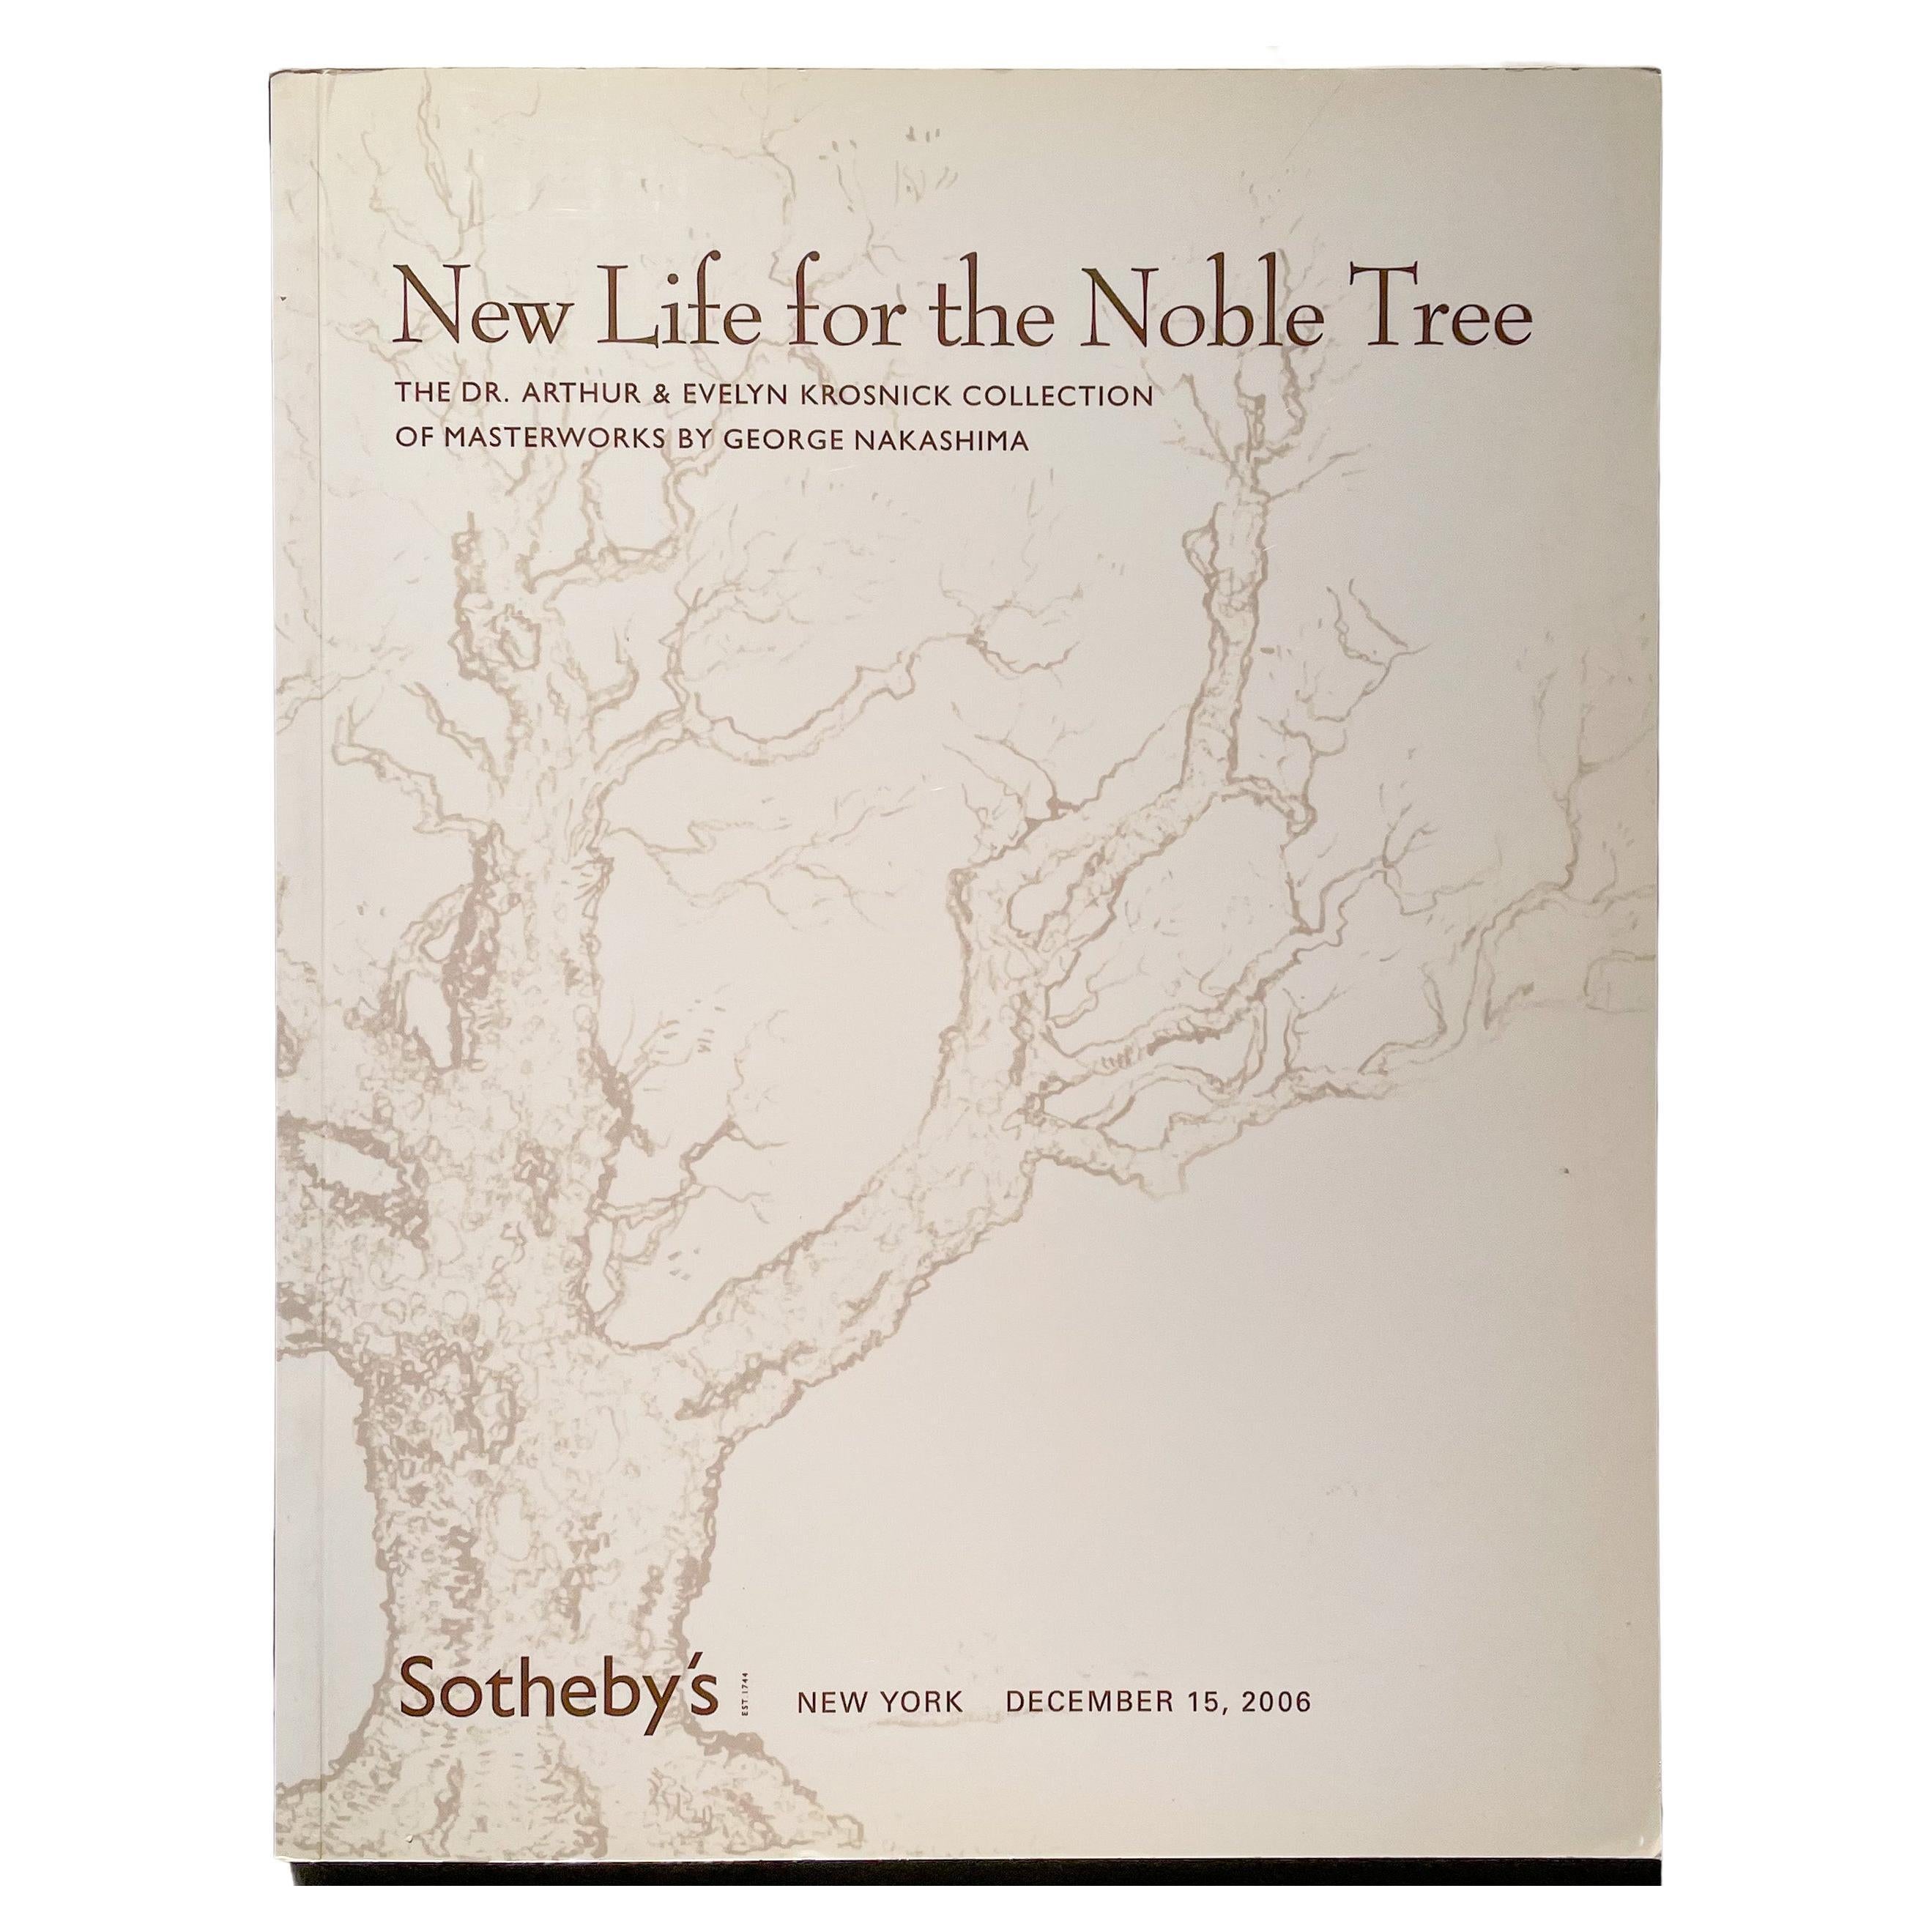 New Life for the Noble Tree: Masterworks by George Nakashima 'Sotheby's' For Sale